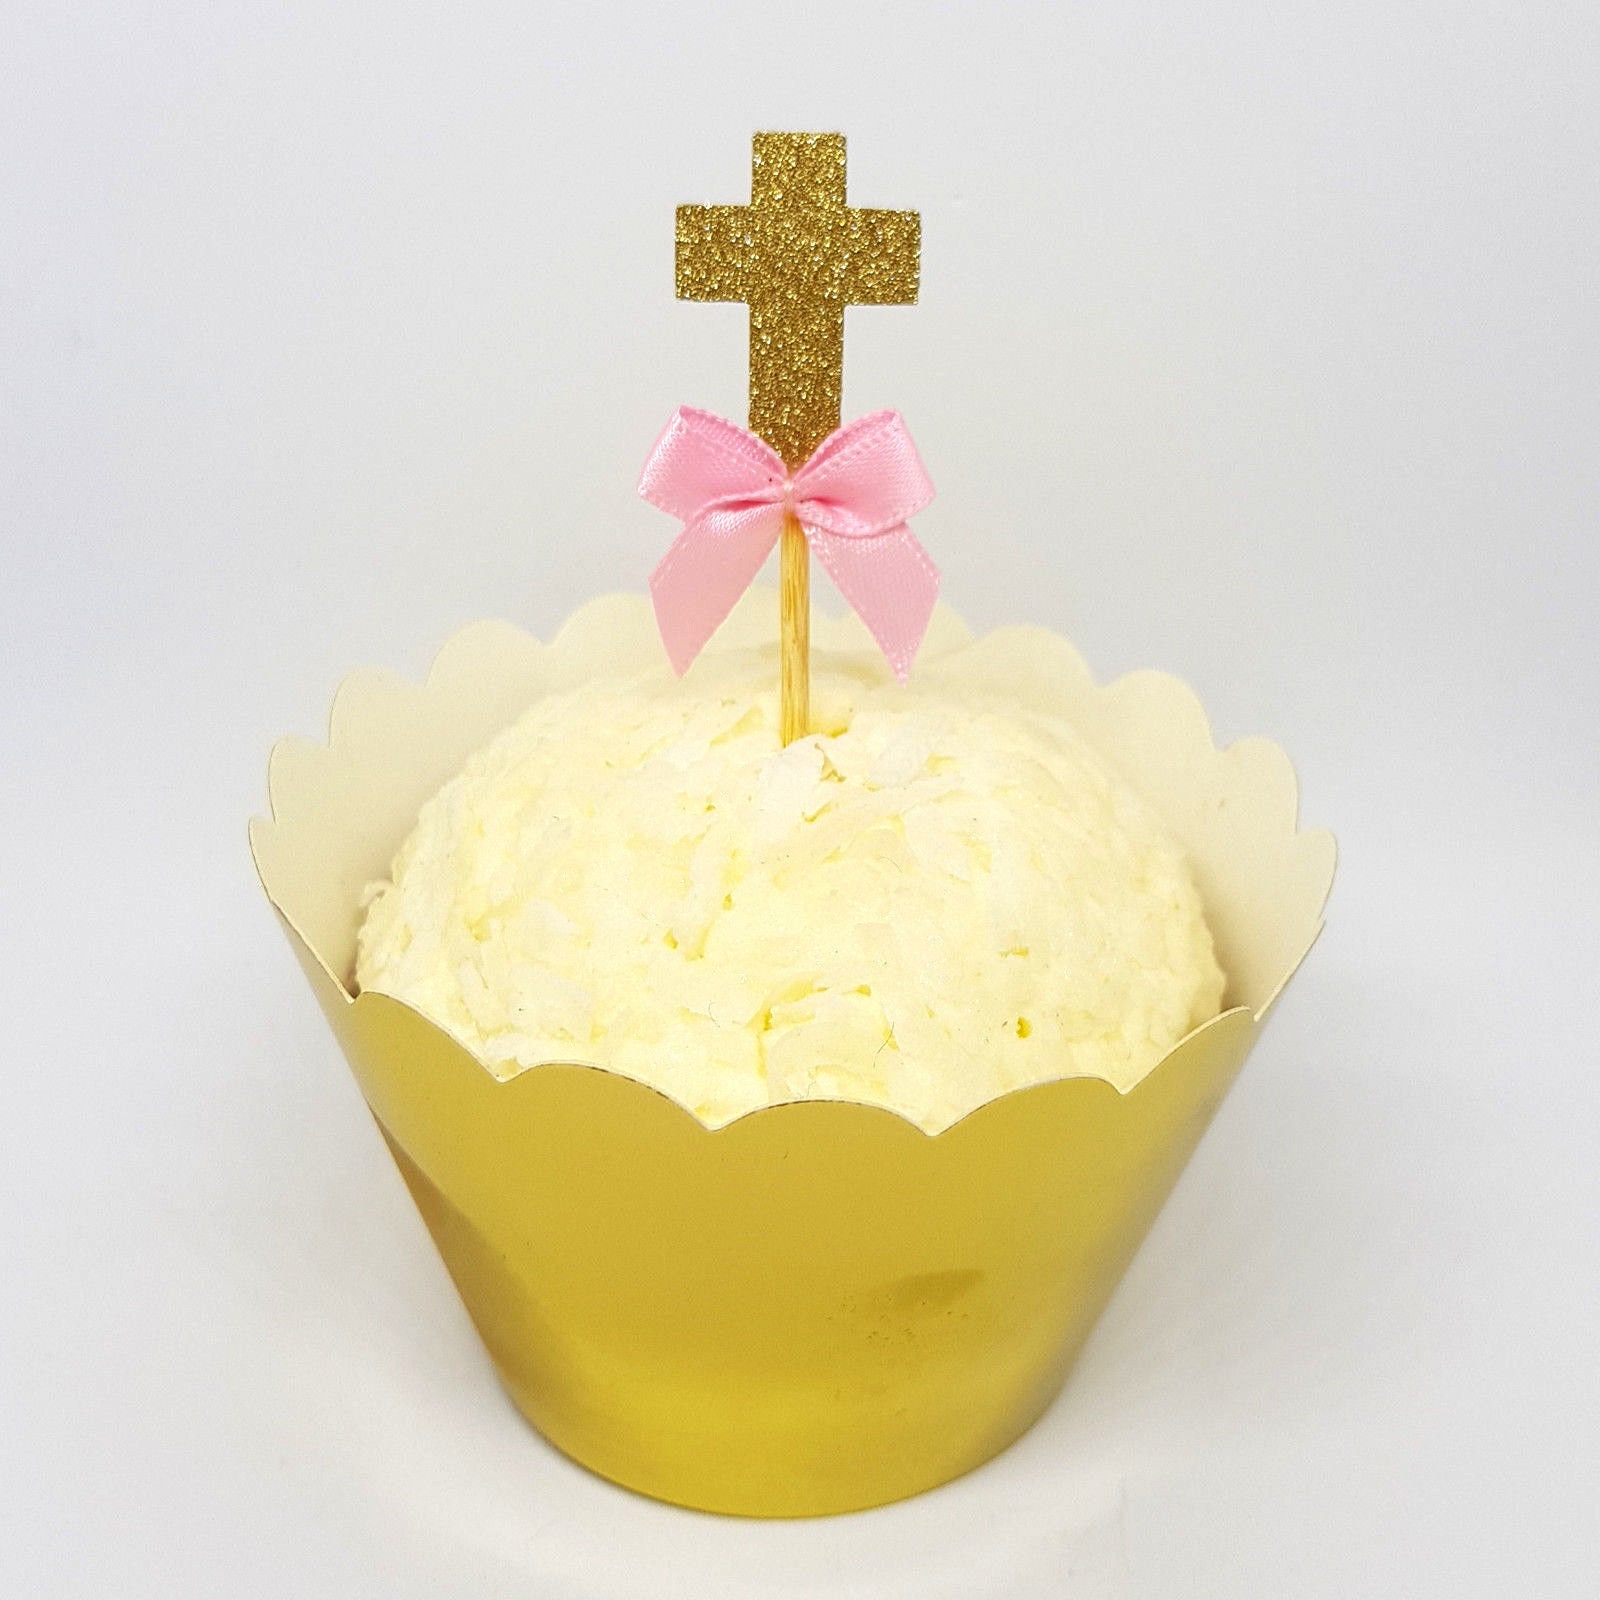 12 Gold Glitter Cross Cupcake Toppers with Pink RibbonChristening/Communion 